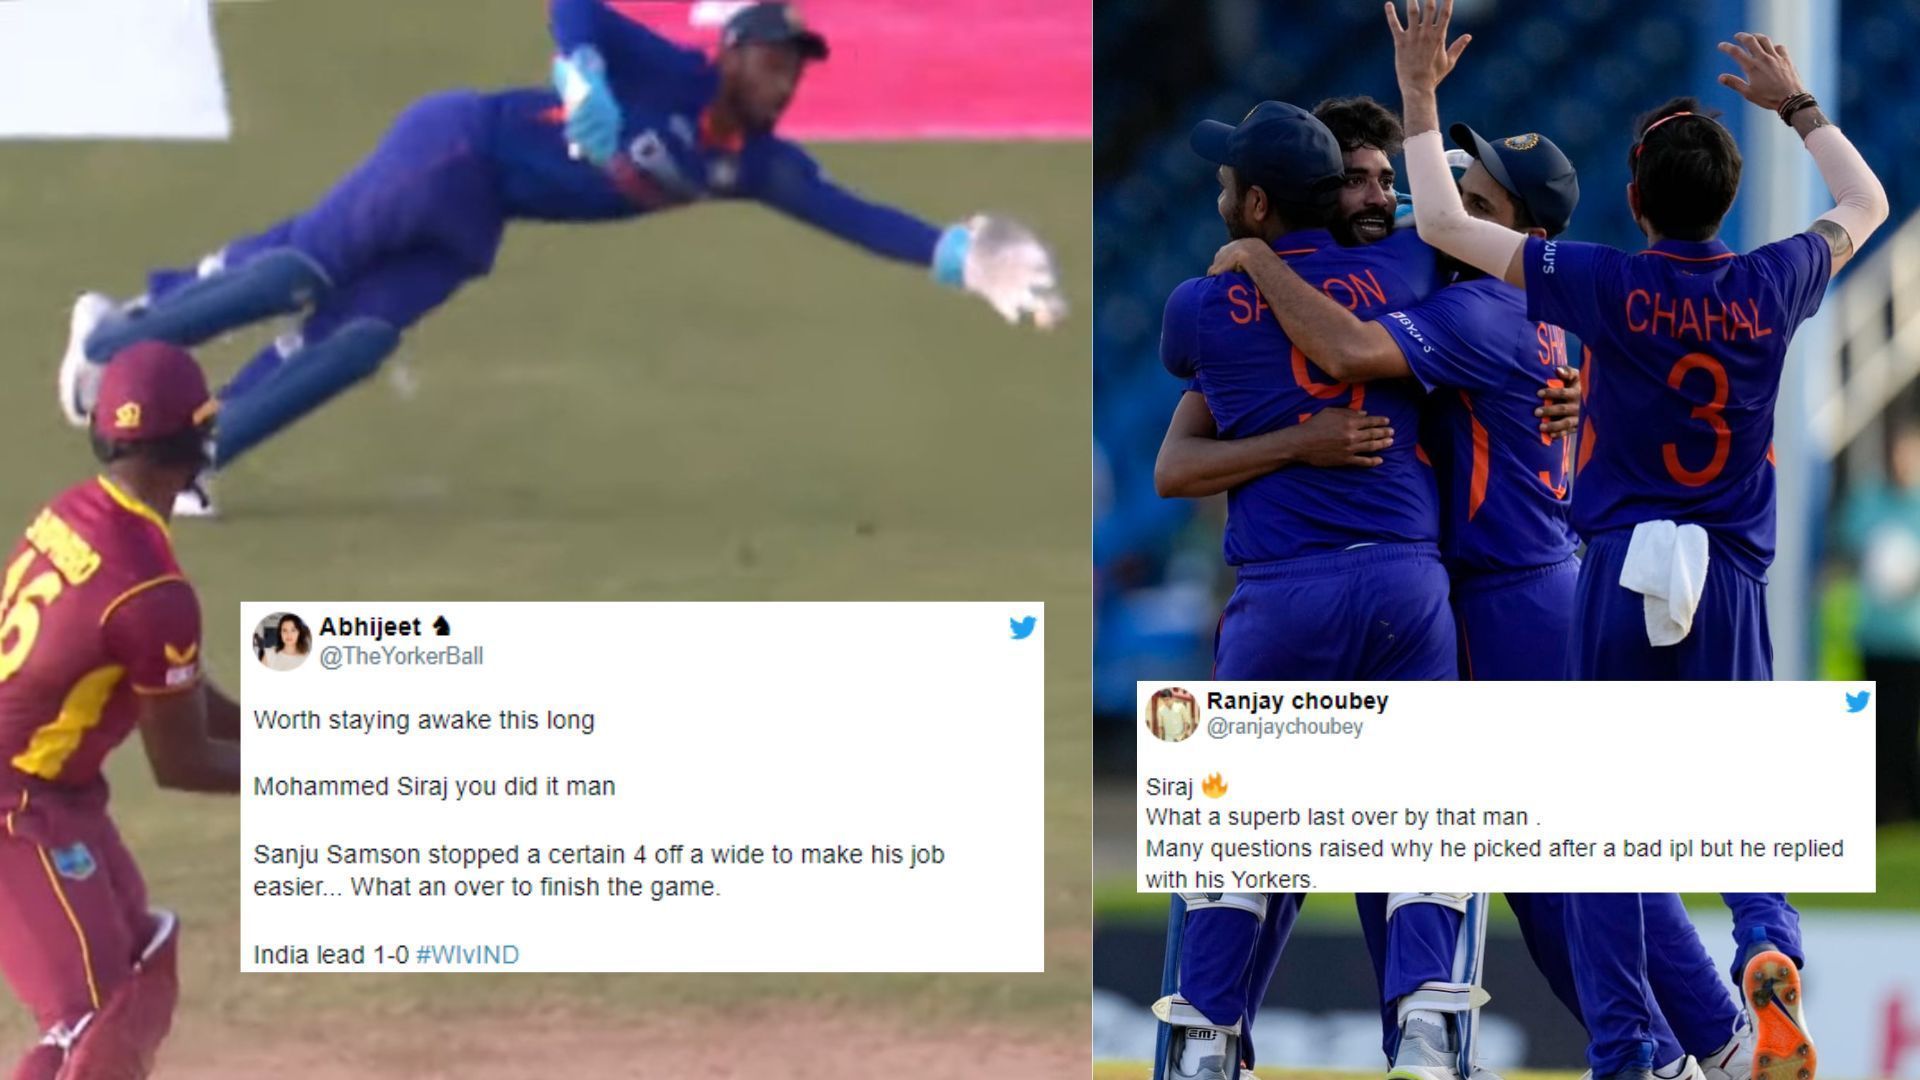 Sanju Samson&#039;s (L) dive and Mohammad Siraj&#039;s incredible death bowling helped India win. (P.C.:Fancode)